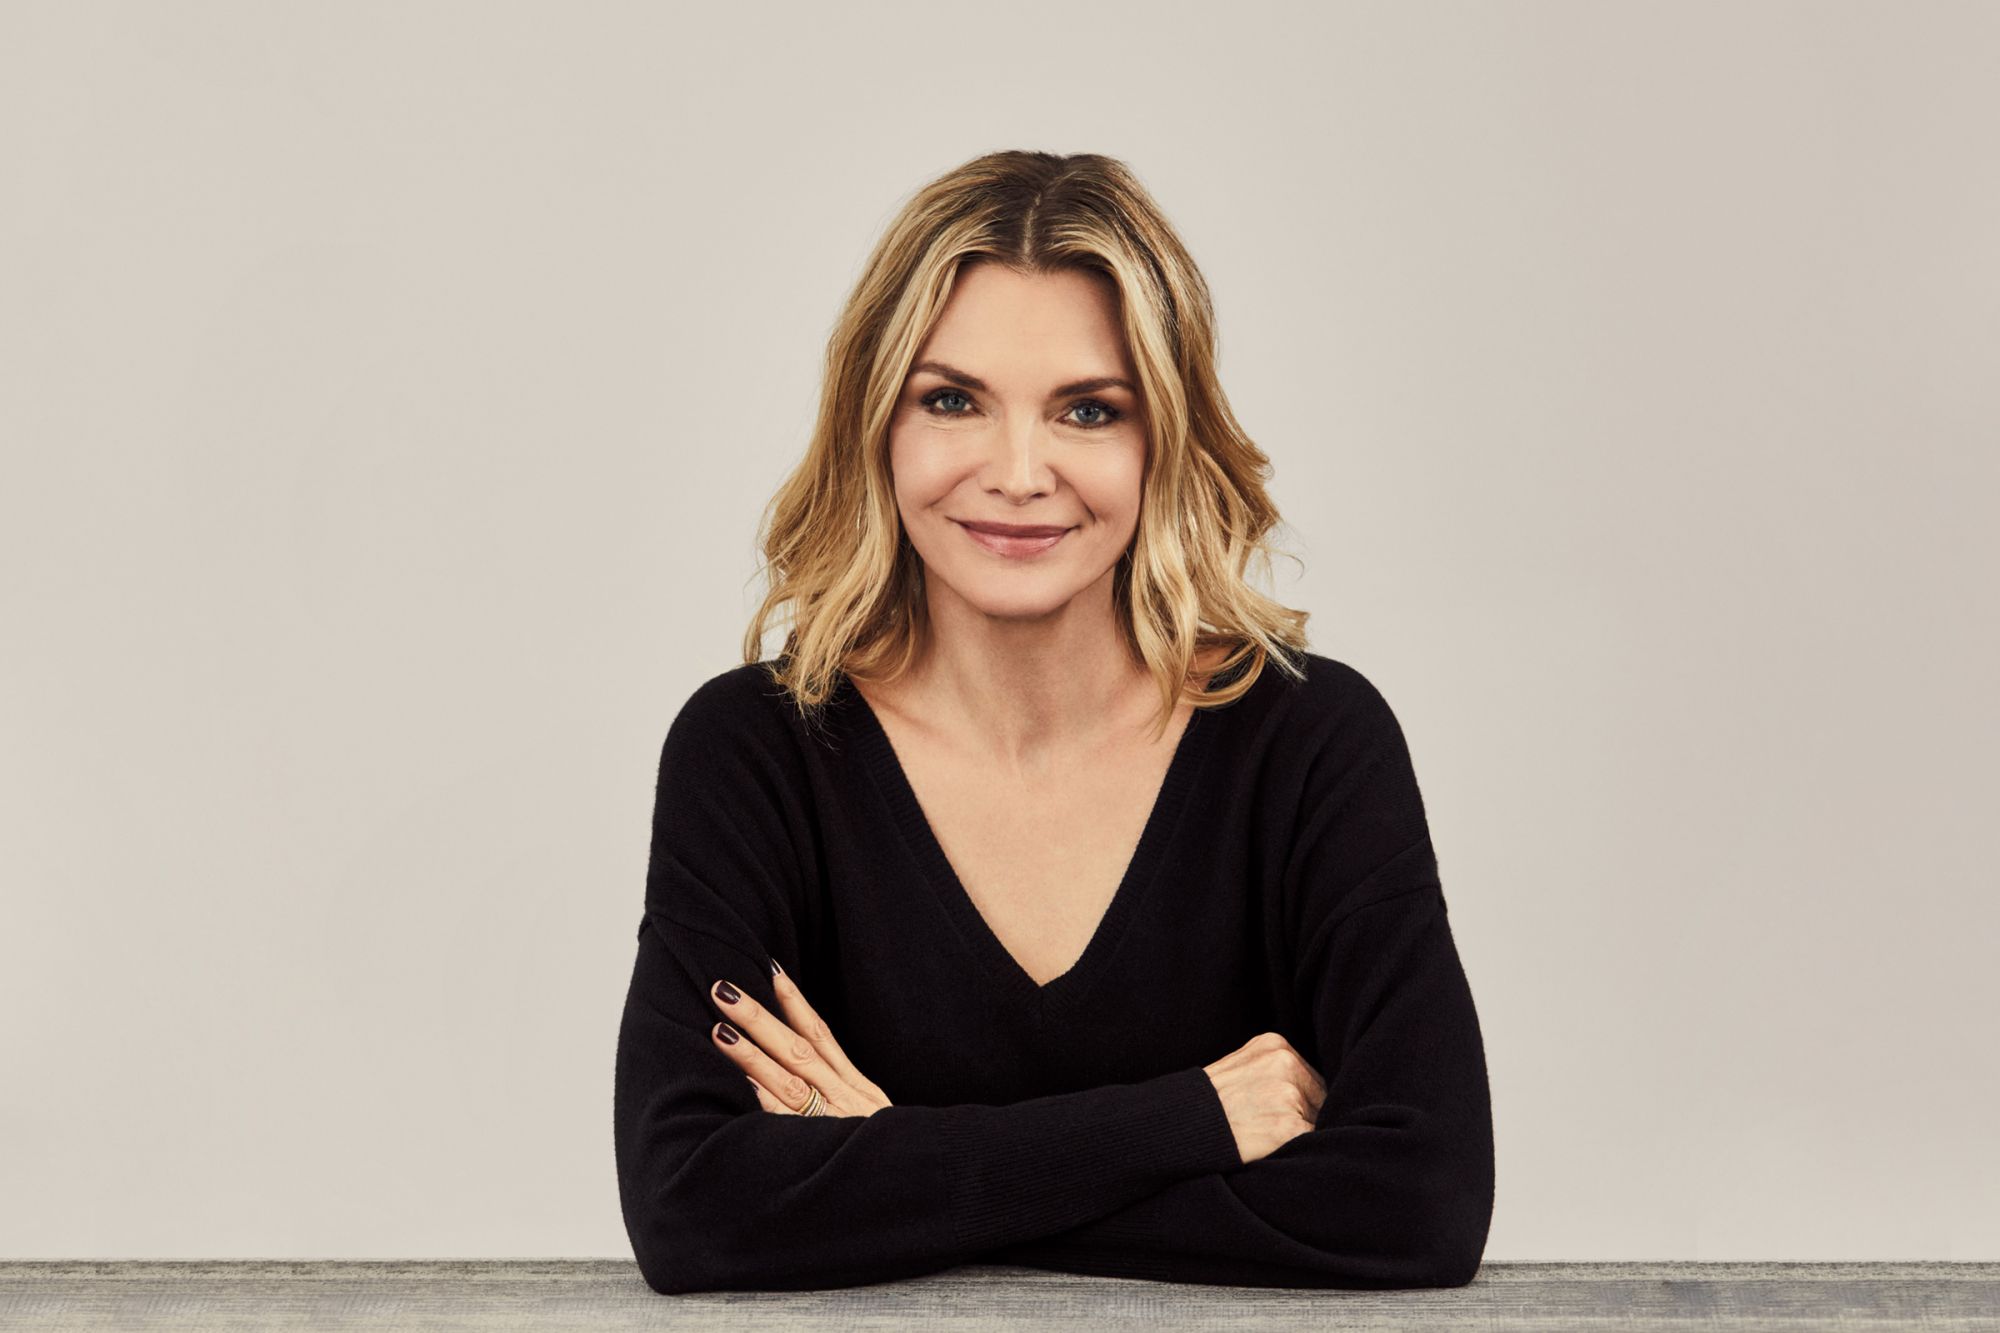 Michelle Pfeiffer's Fragrance Brand Took 20 Years (and Plenty of Rejection) to Build